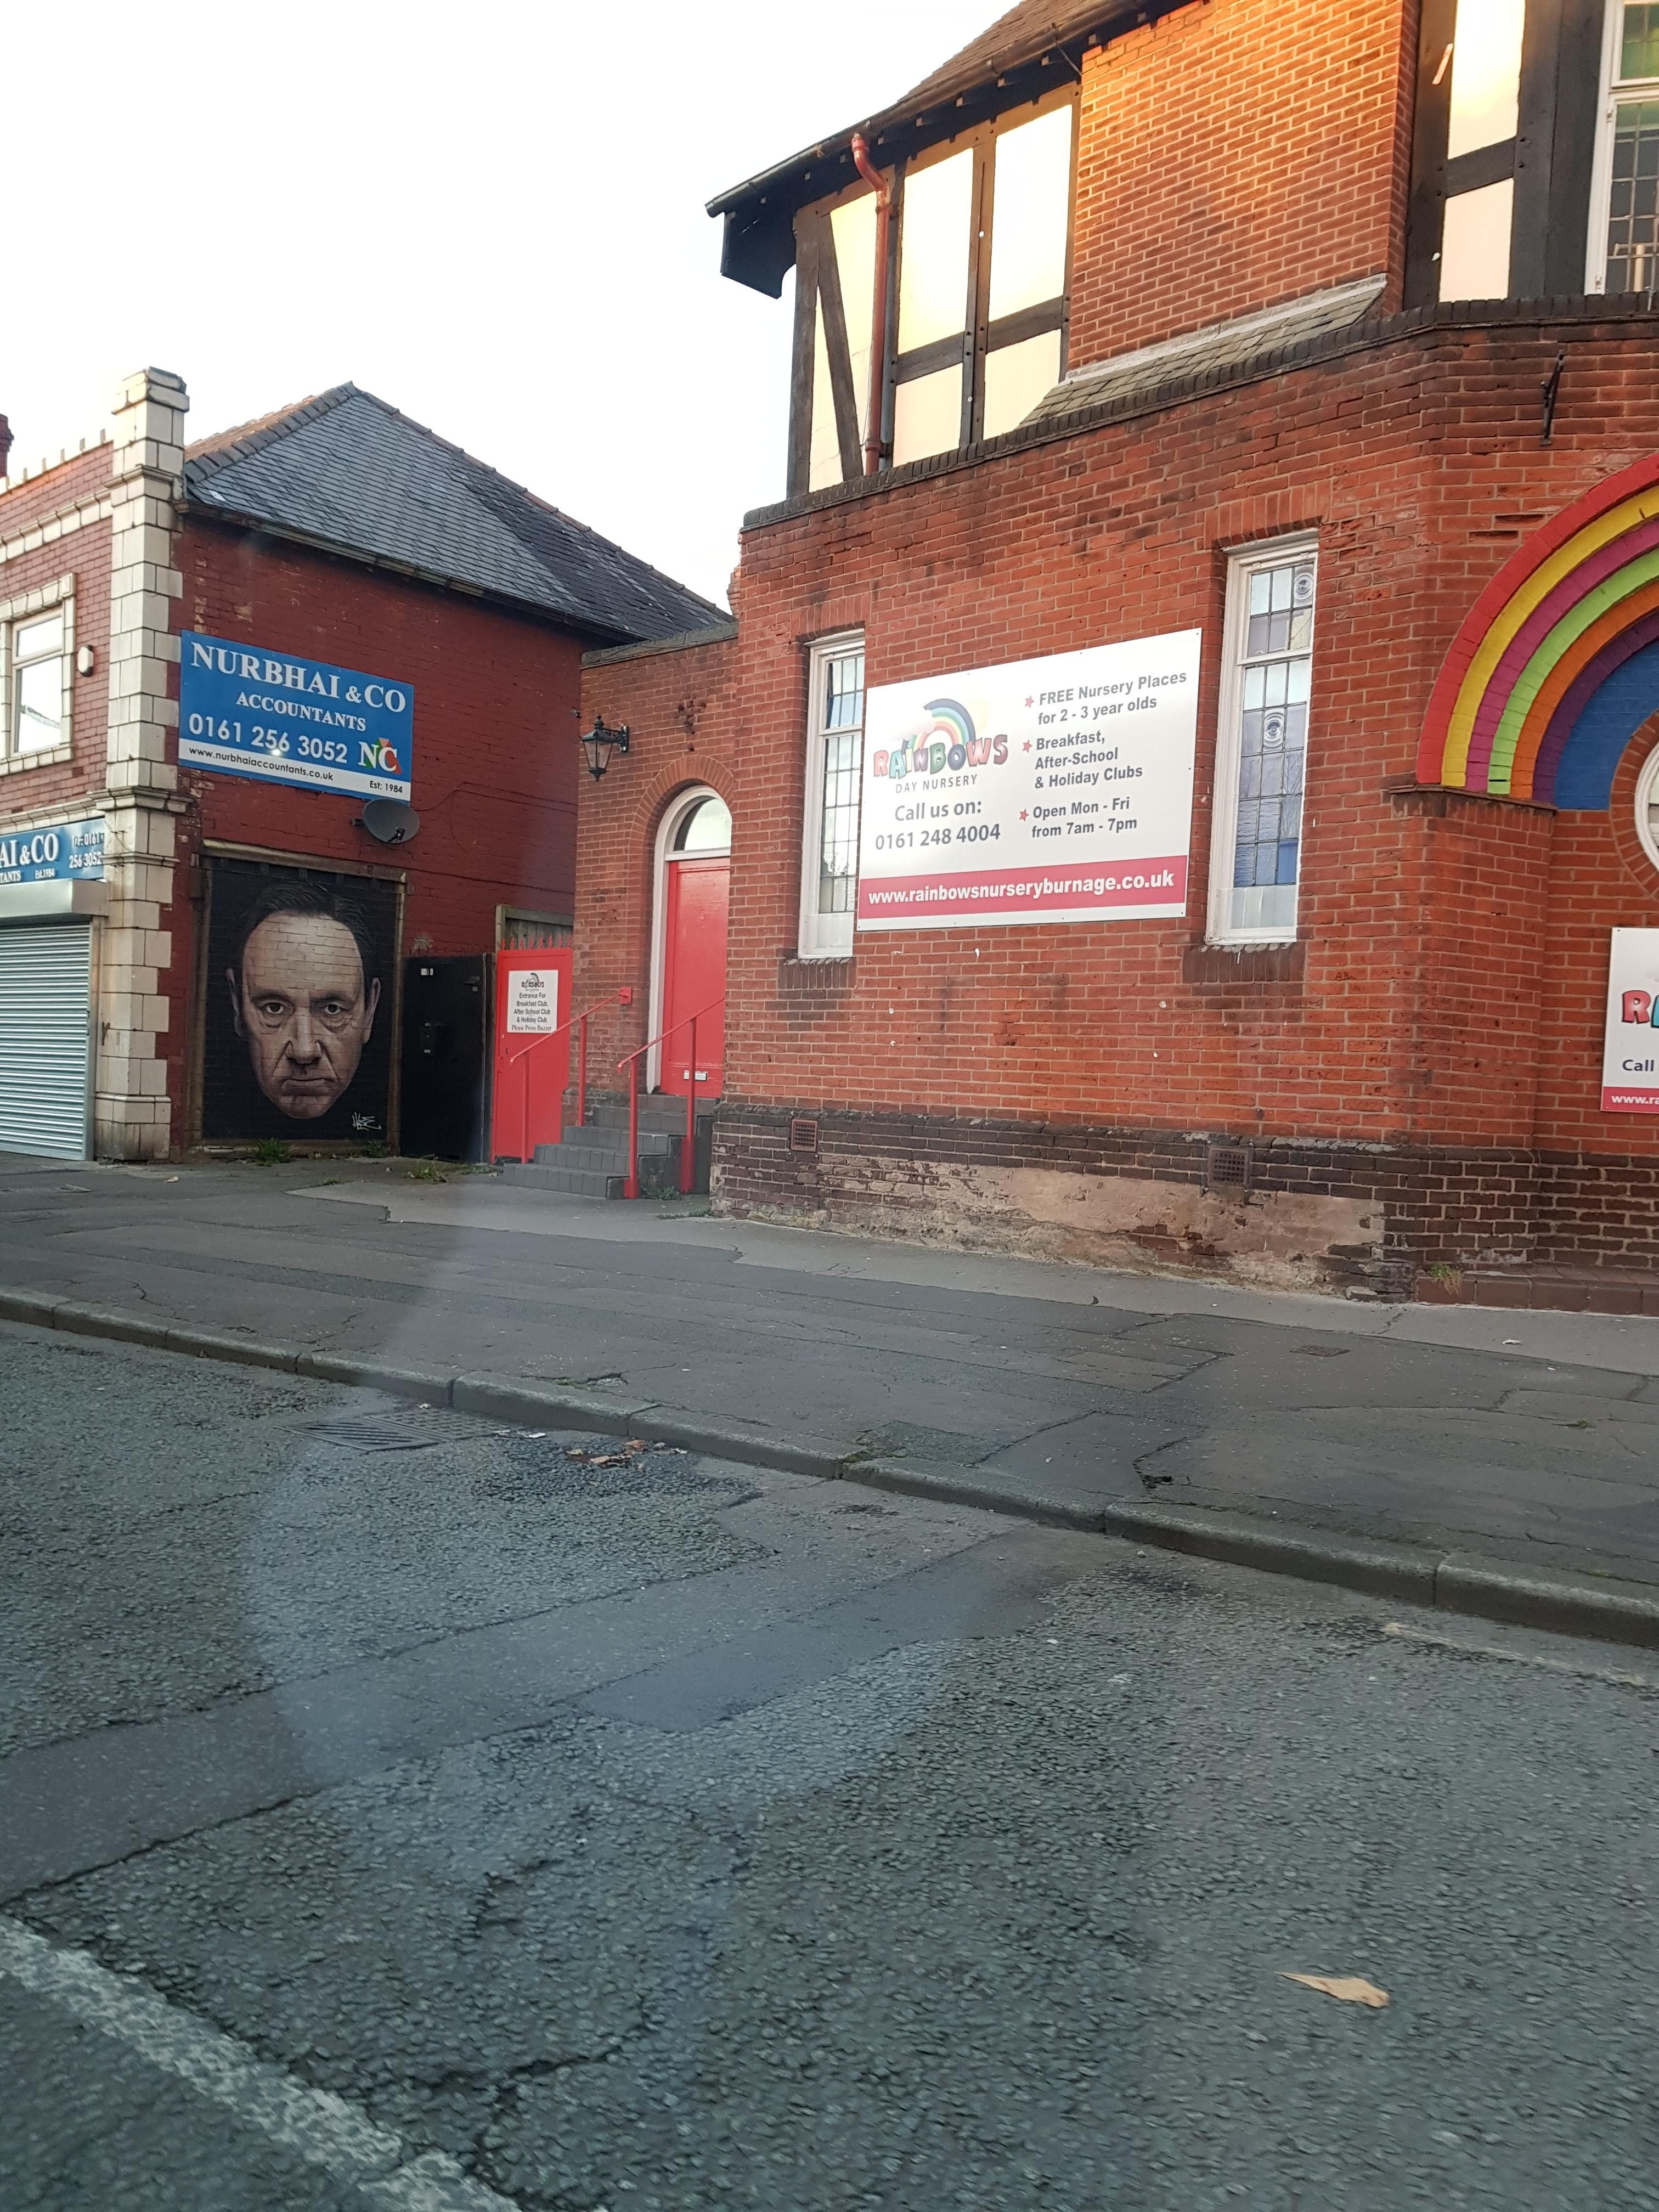 Mural to Kevin Spacey is now awfully sinister looking next to the entrance of a nursery!